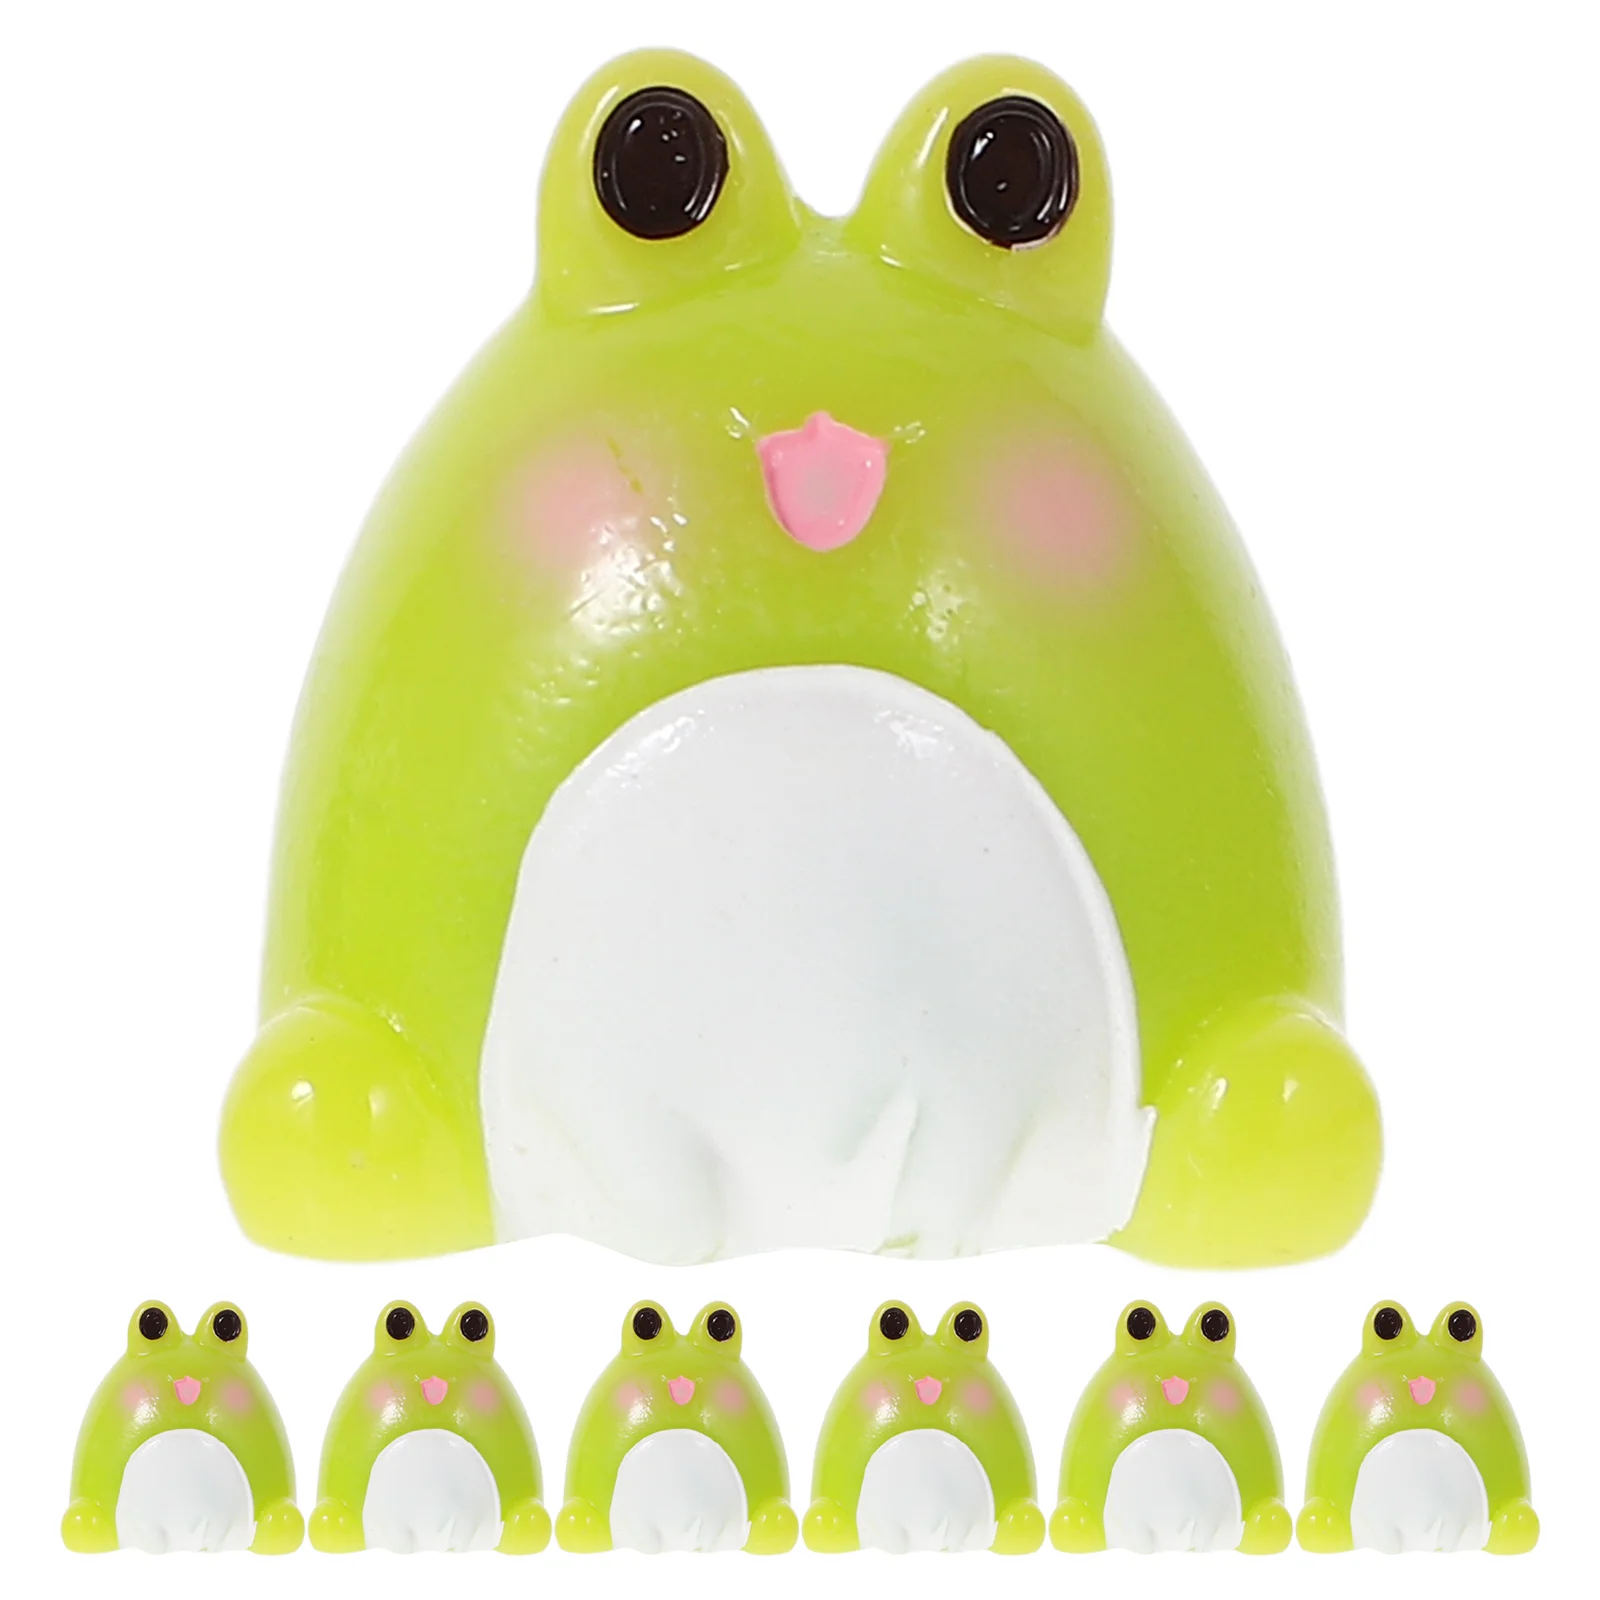 

20 Pcs Mini Frog Ornament Resin Frogs Figurines Outdoor Toys Miniature Statues Greenery Decor Decorate Animal Model